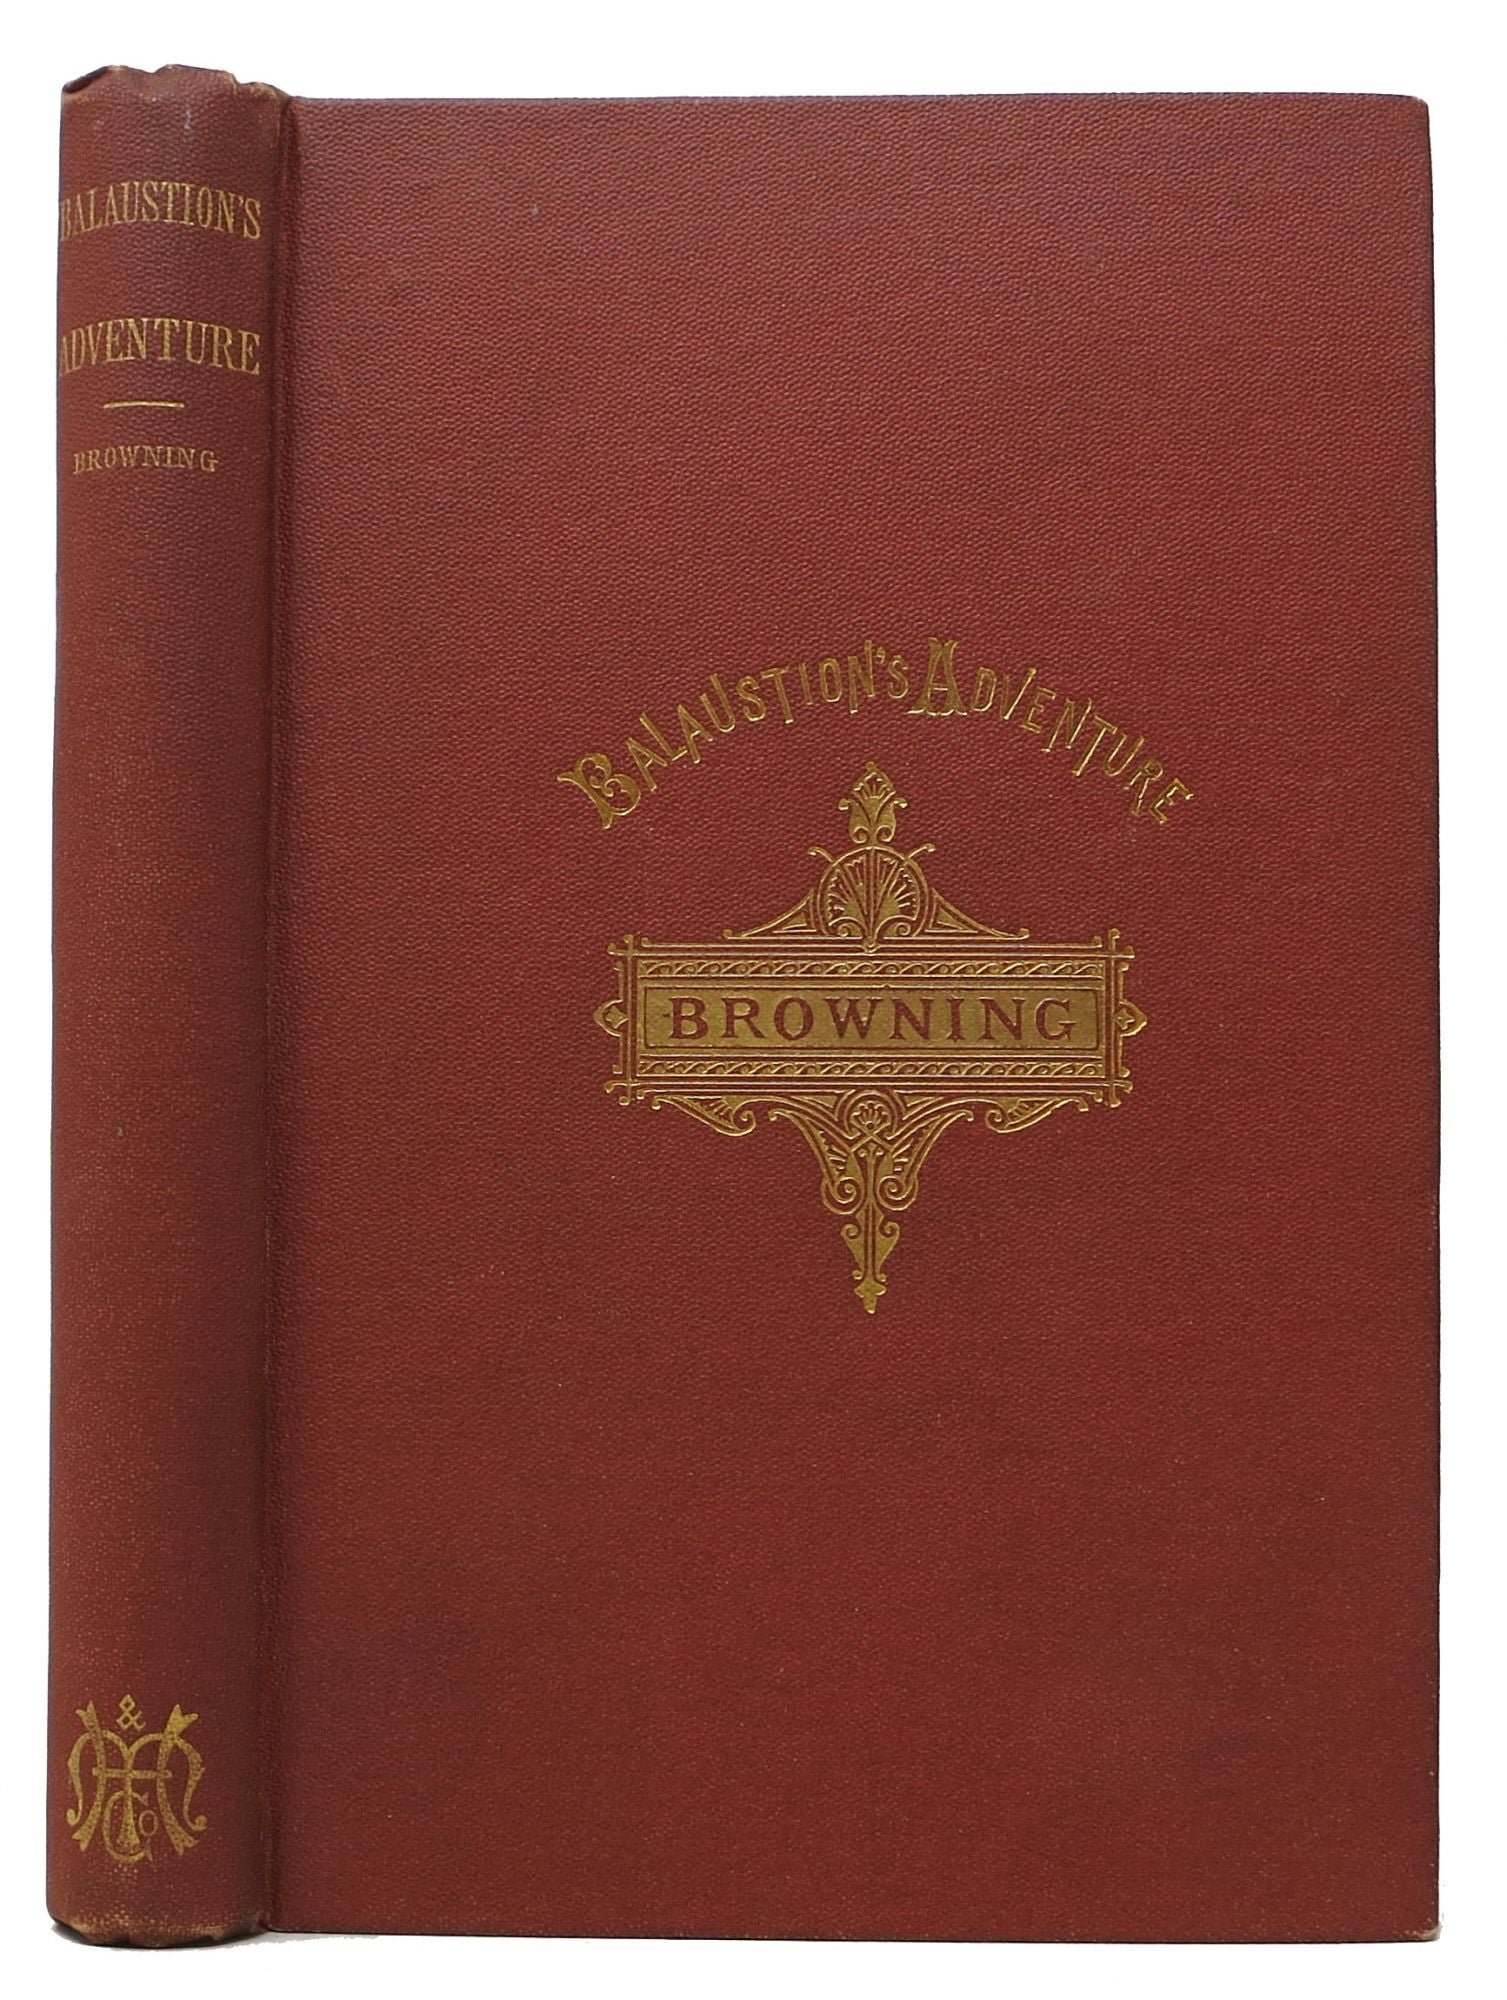 Browning, Robert [1812 - 1889] - BALAUSTION'S ADVENTURE: Including a Transcript from Euripides